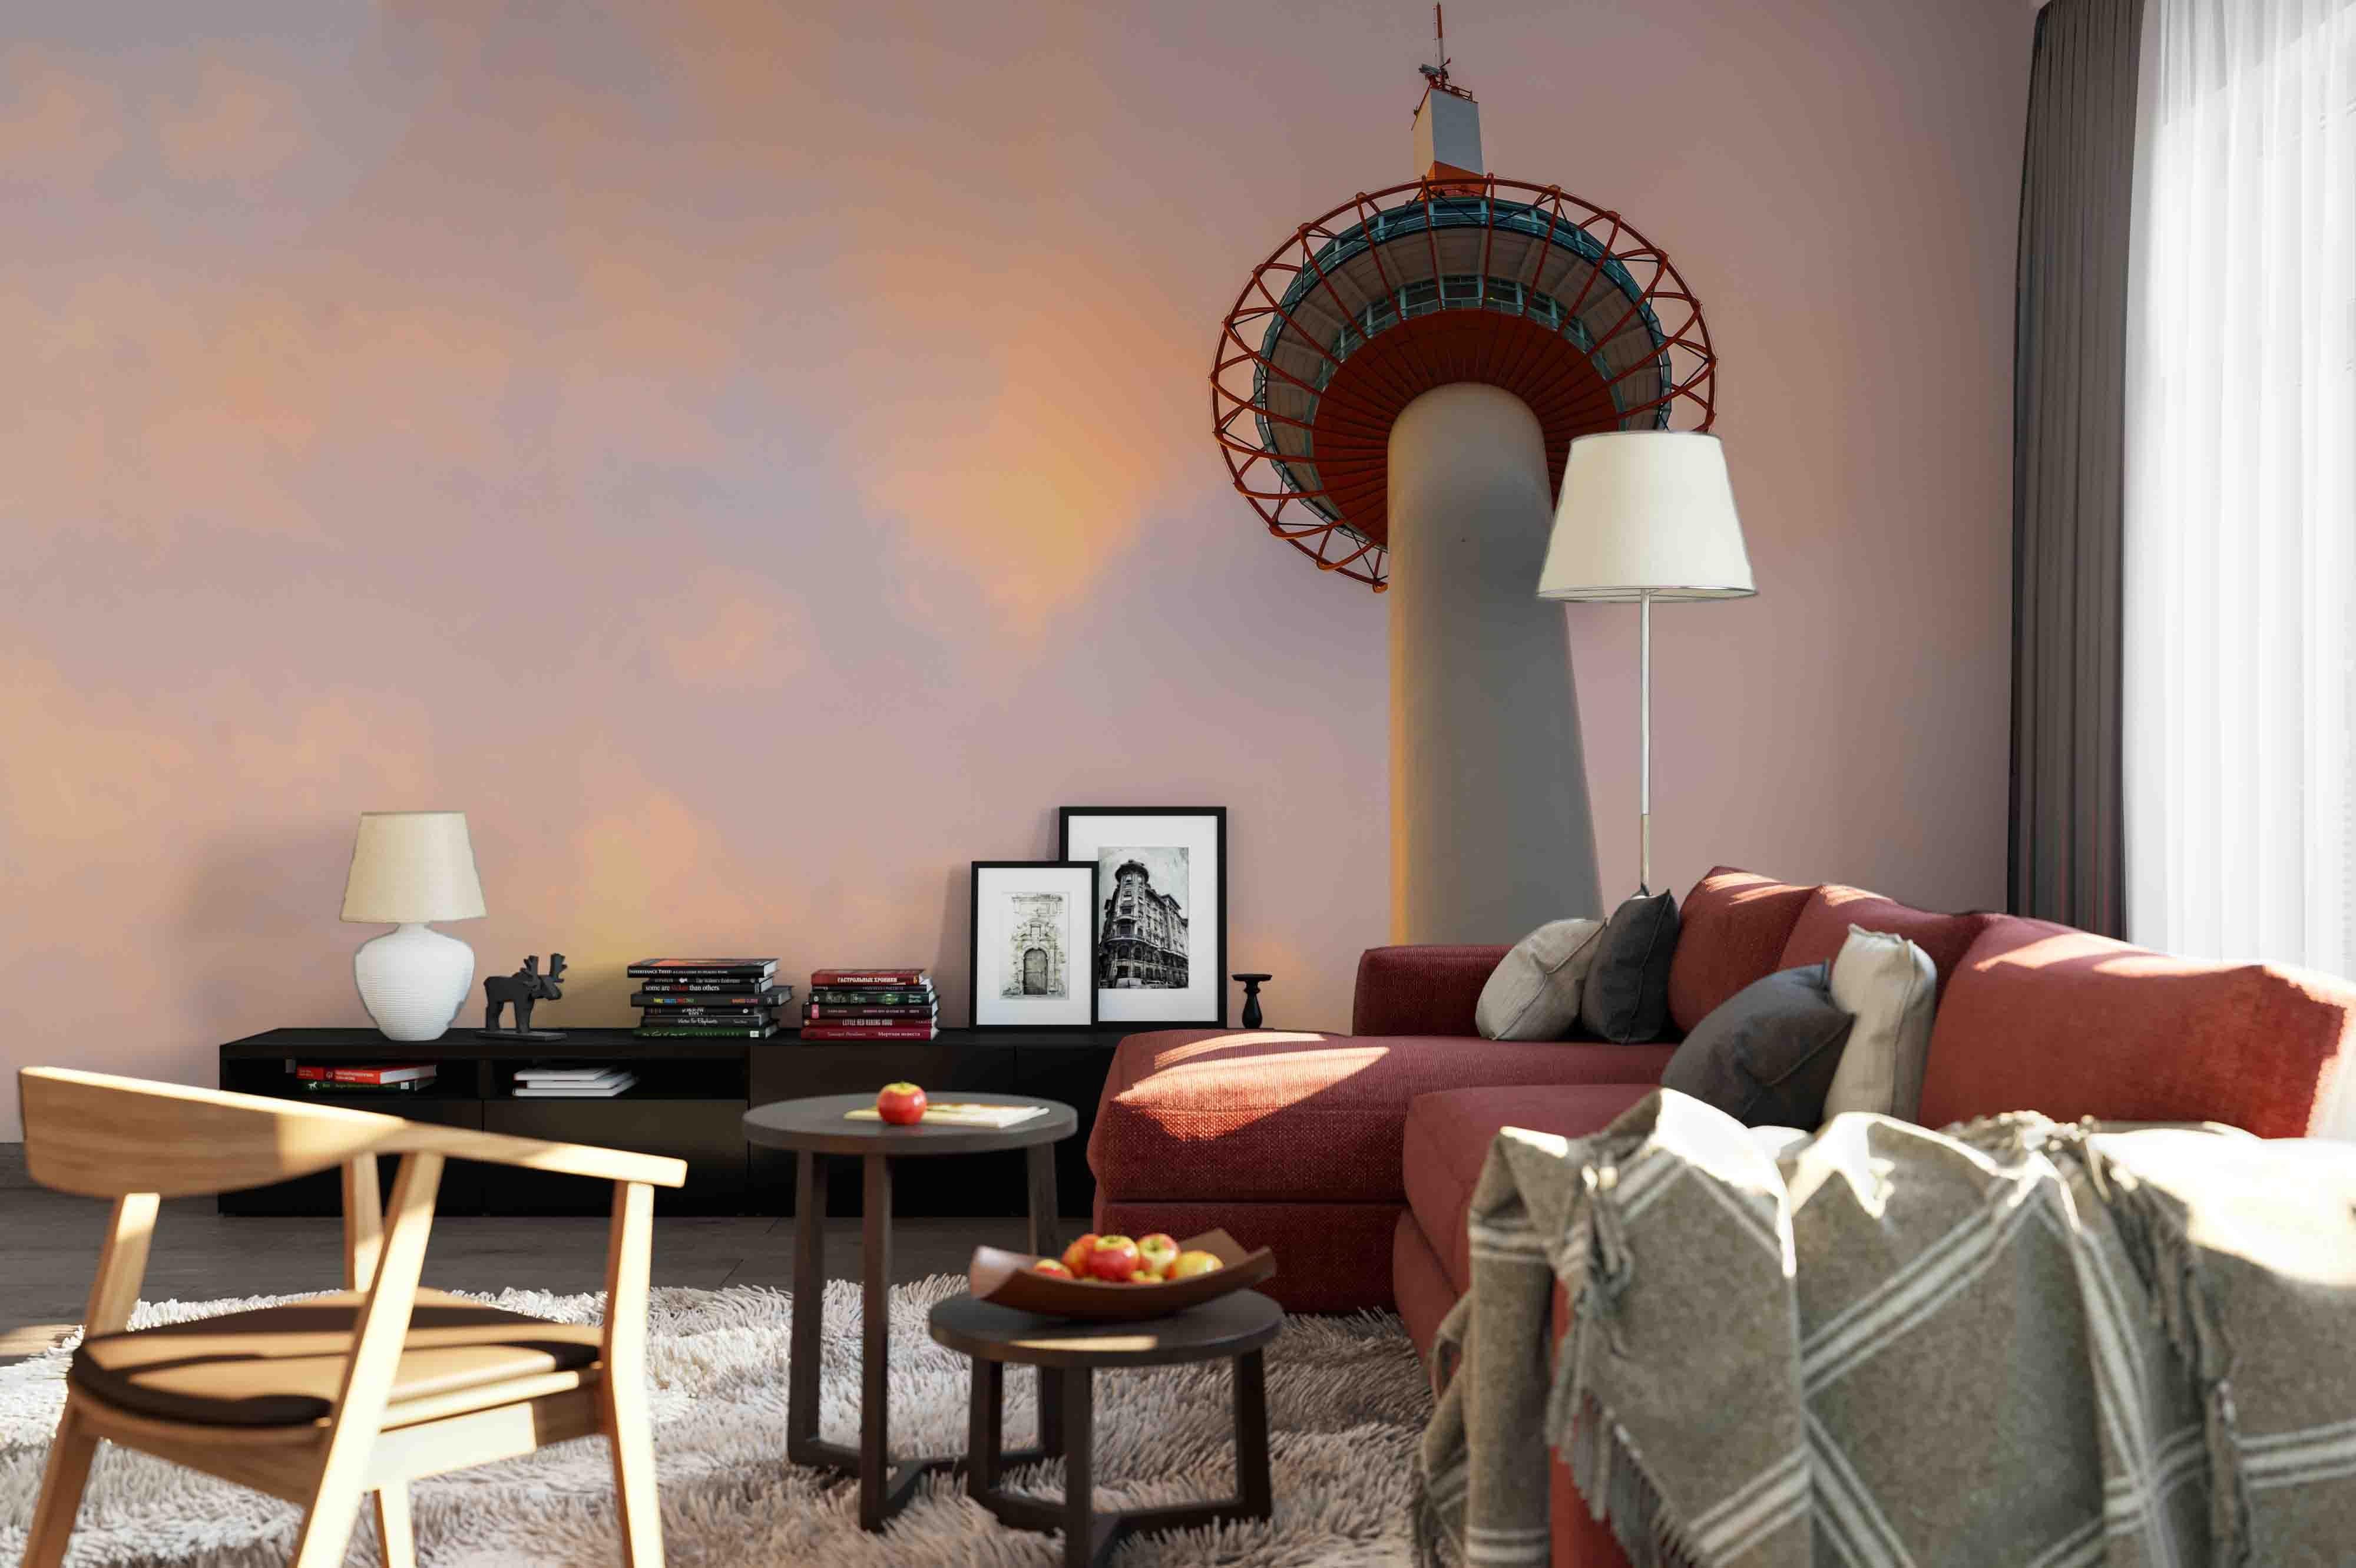 3D japan kyoto tower filtered image processed vintage effect wall mural wallpaper 45- Jess Art Decoration